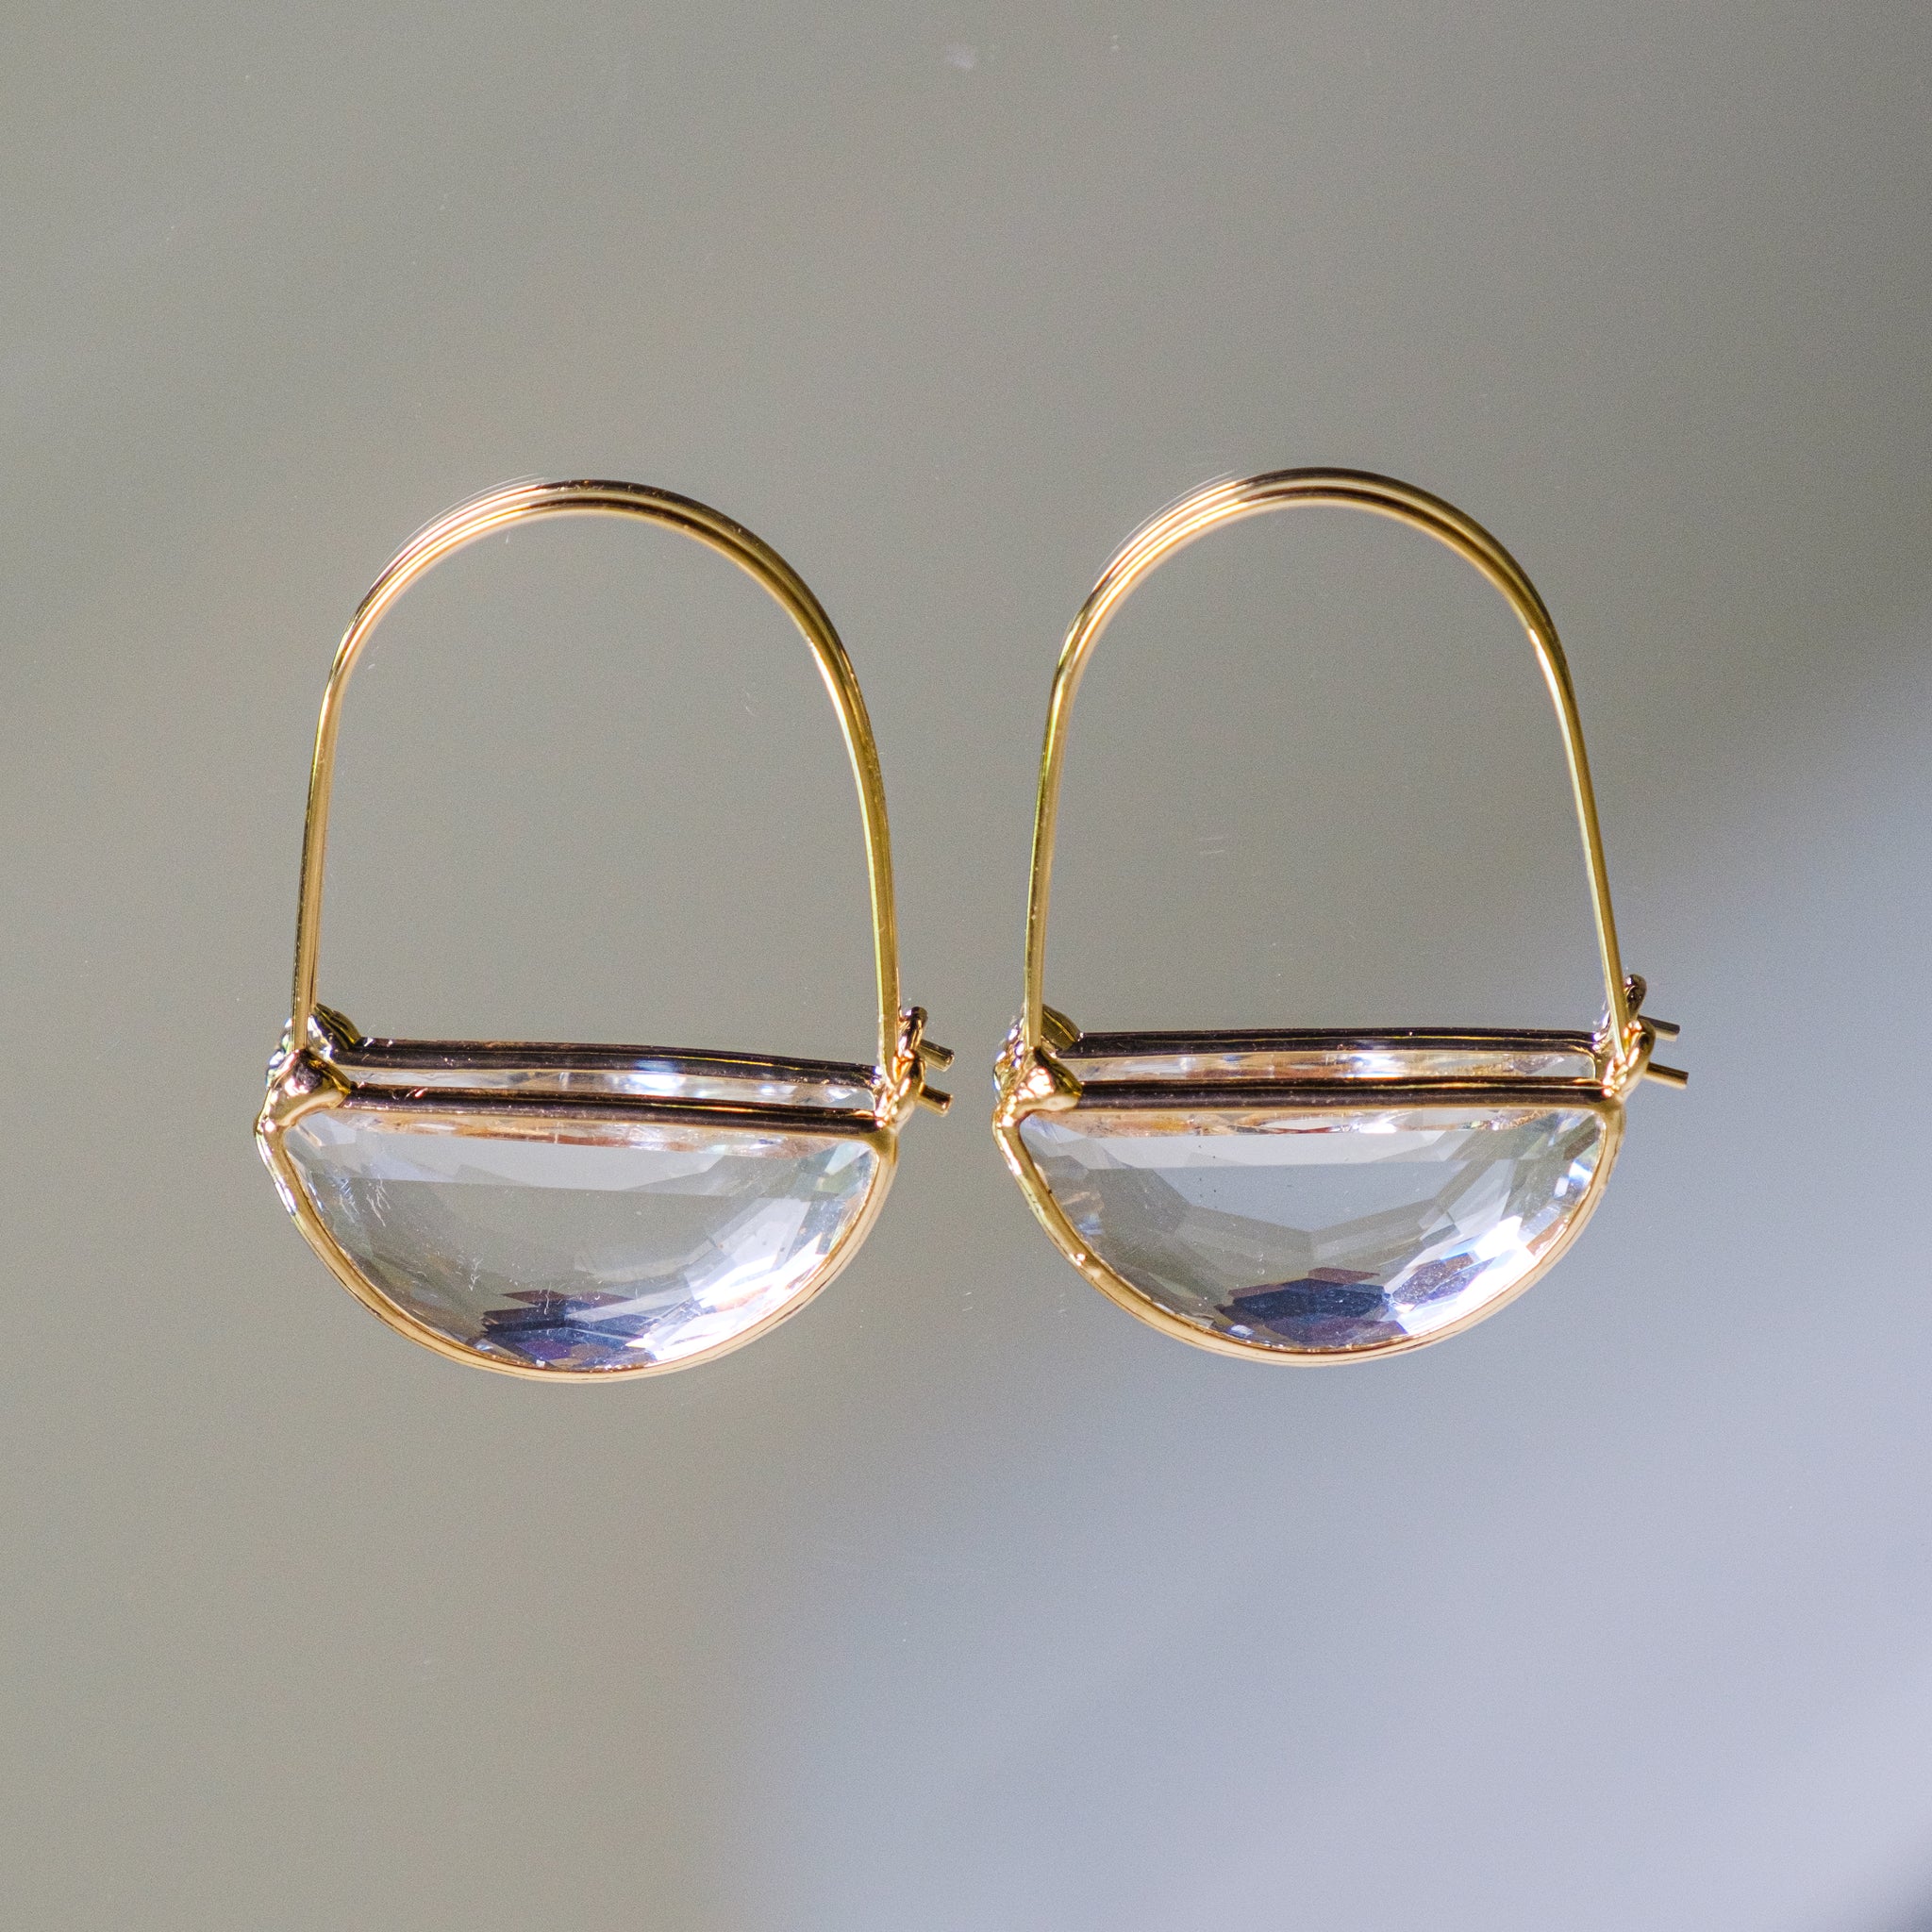 Hoops with clear glass droplets. Gold tone.